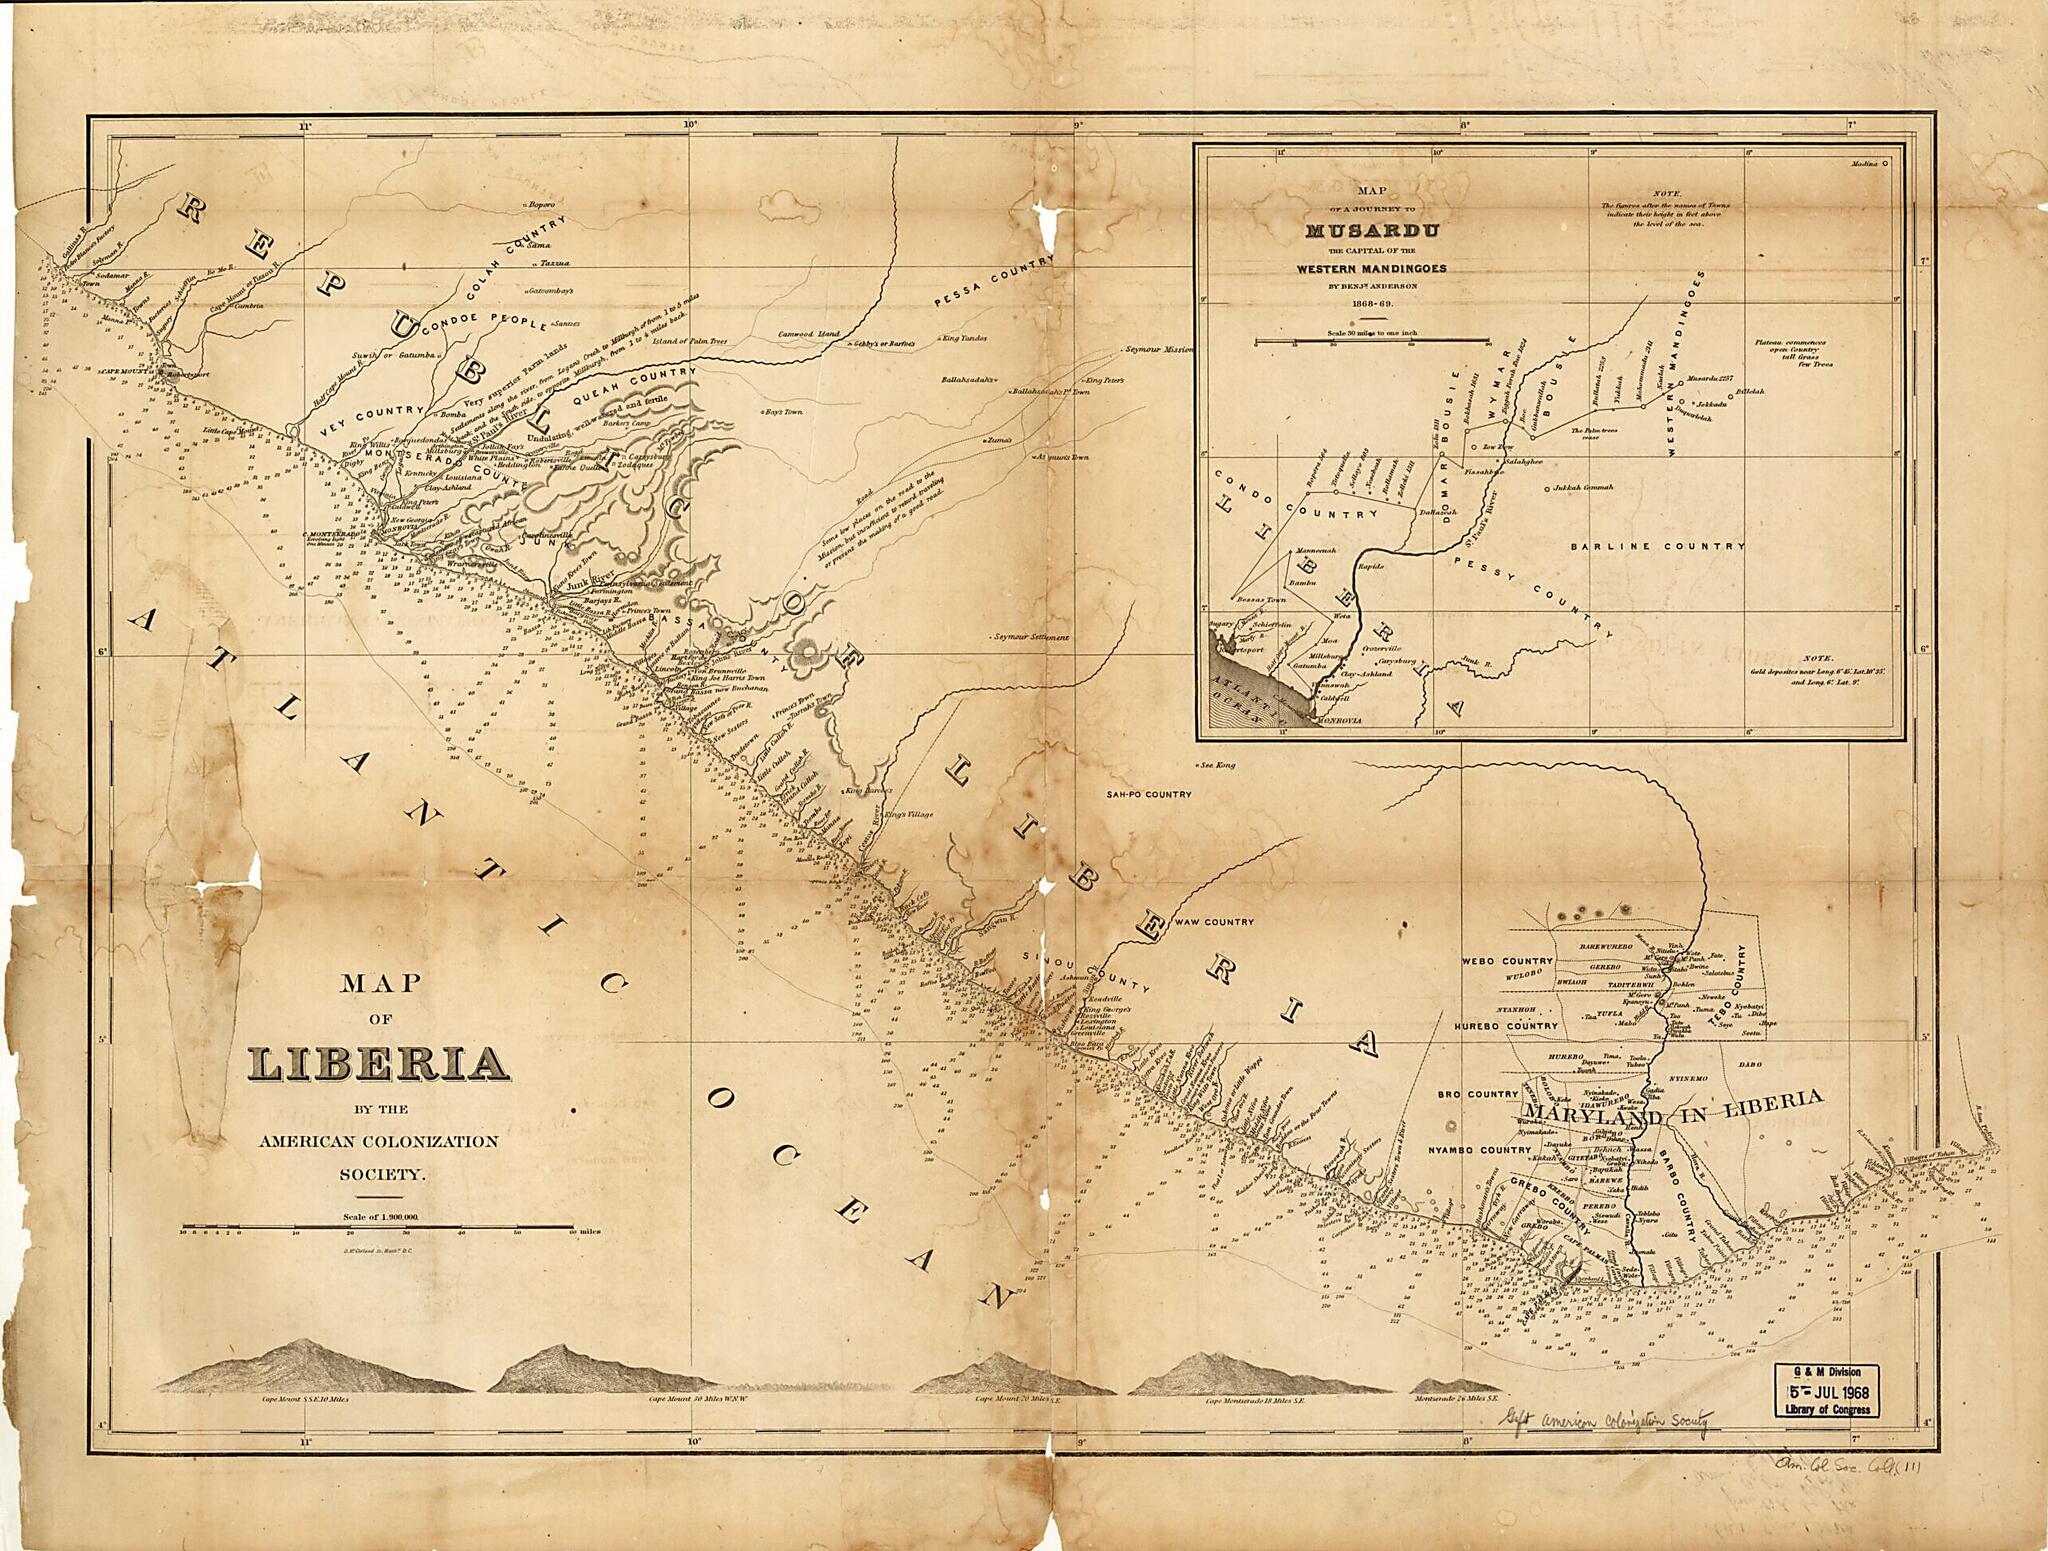 This old map of Map of Liberia from 1870 was created by  American Colonization Society, D. McClelland in 1870